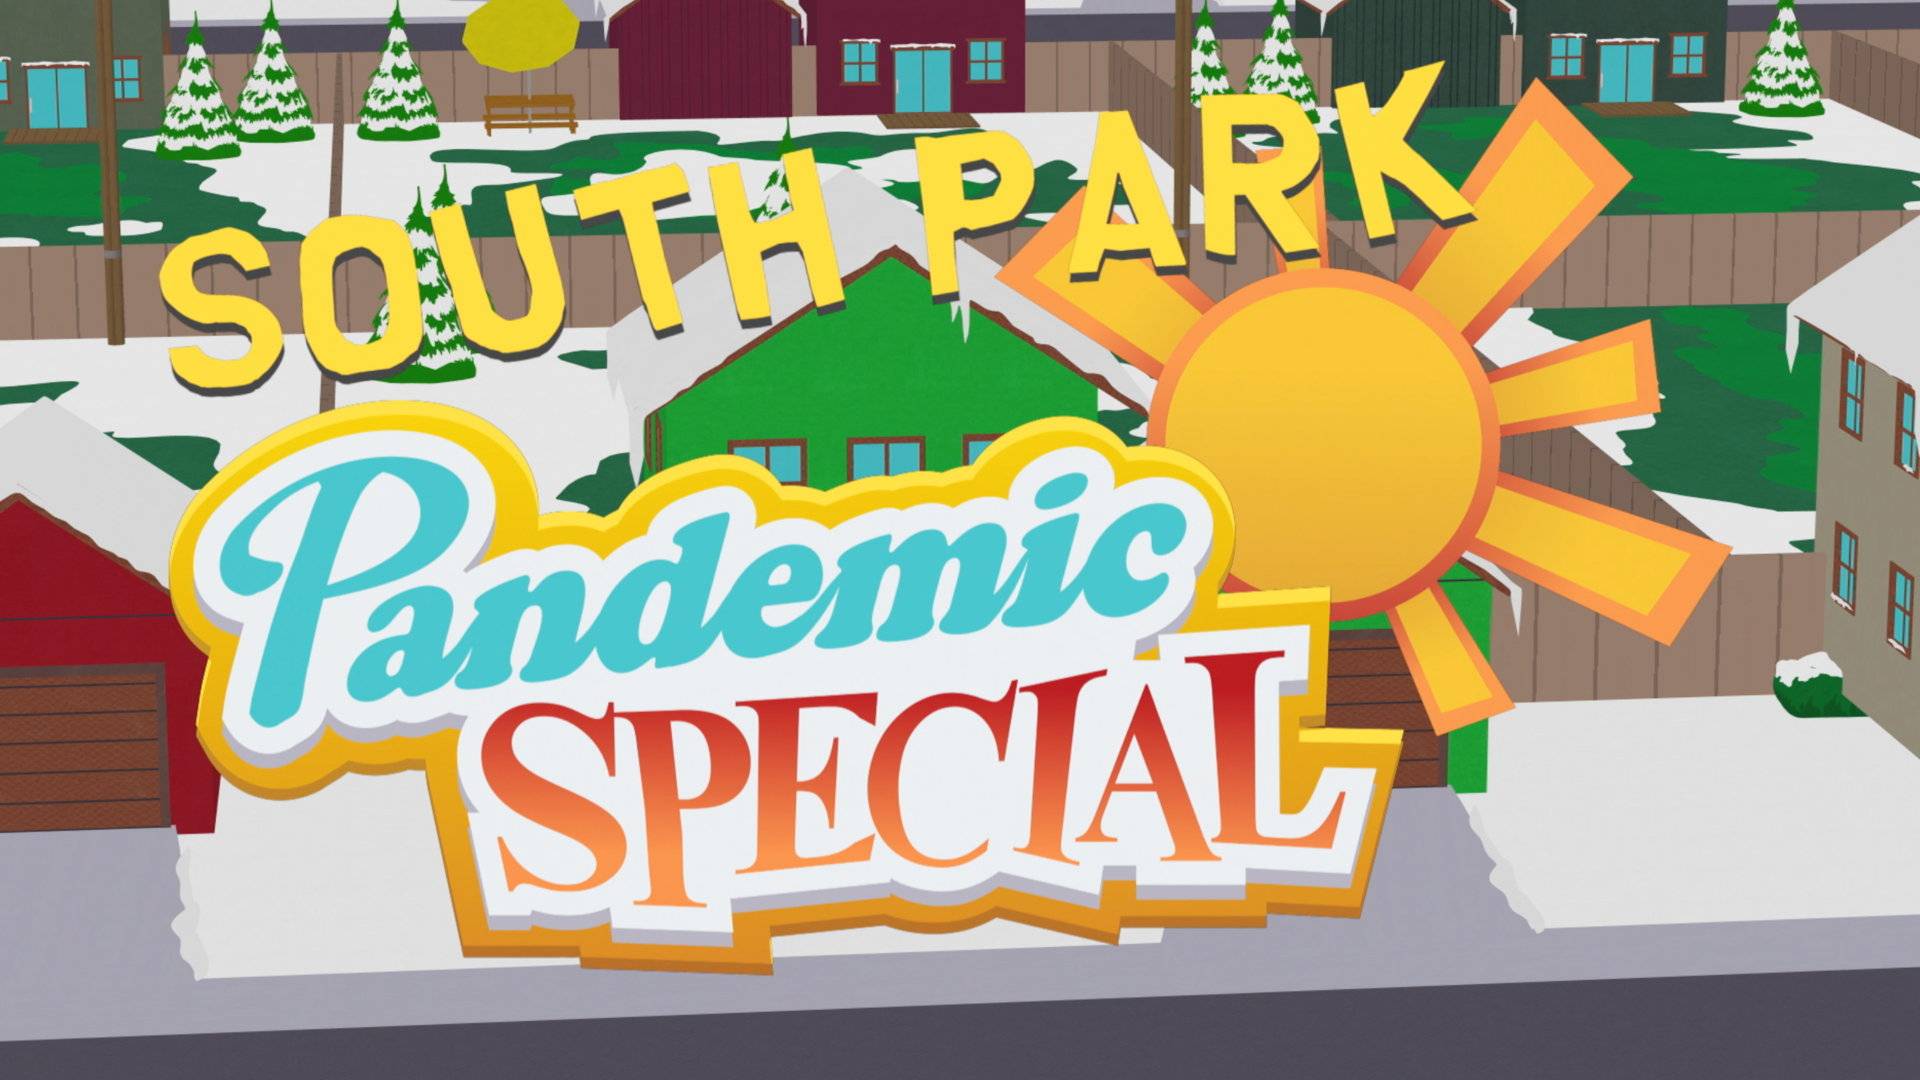 South Park Elementary on Lock Down - South Park (Video Clip)